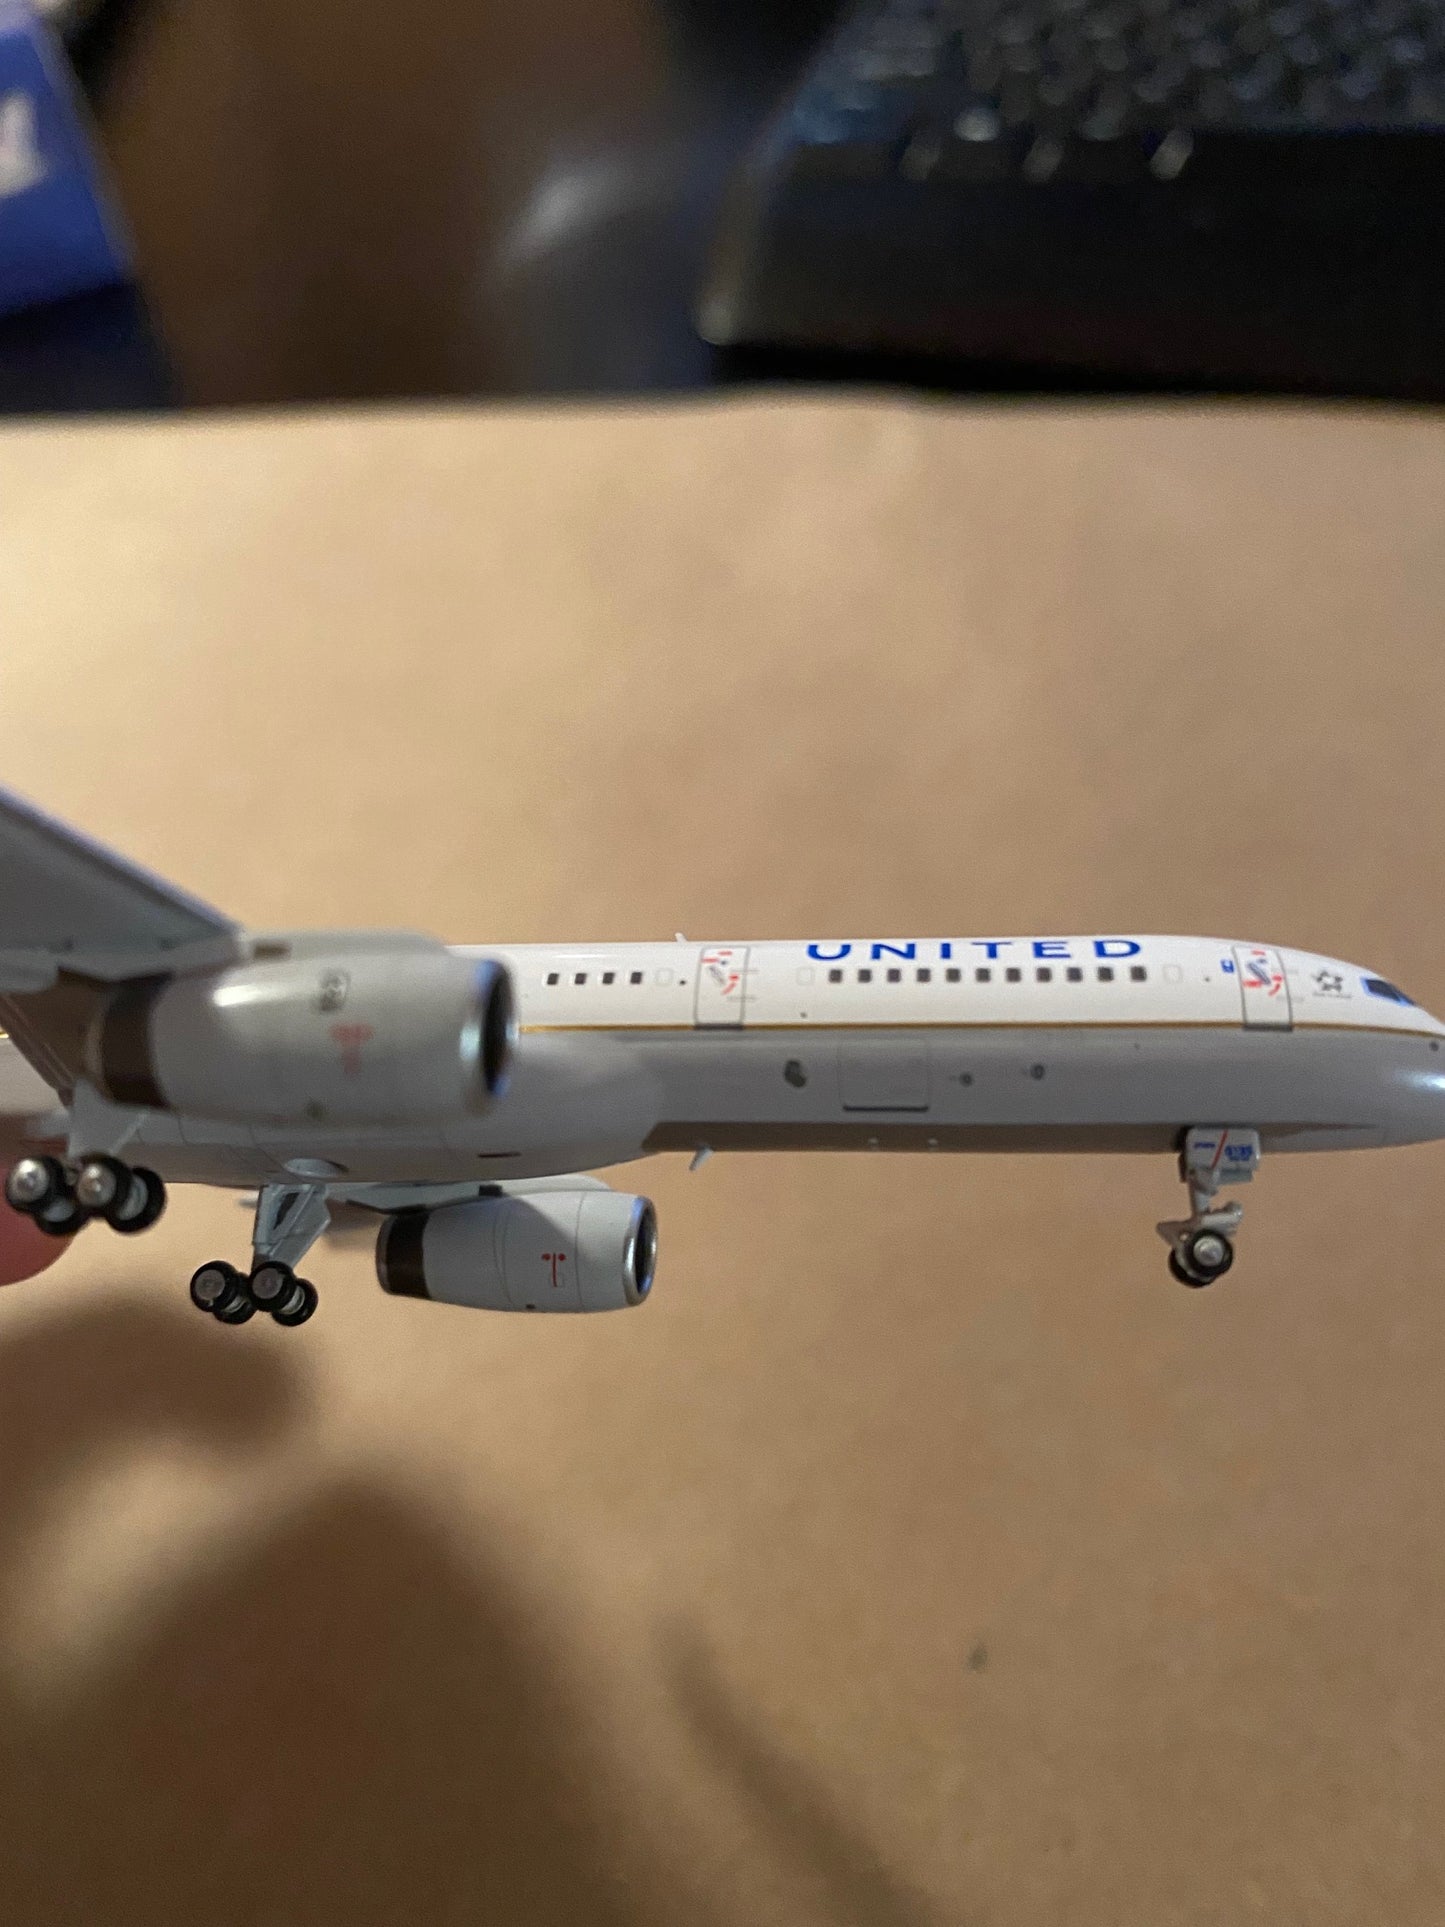 1/400 United Airlines B 757-200 "CO-UA Merged Livery" NG Models 53179 *Small paint chip on fuselage*